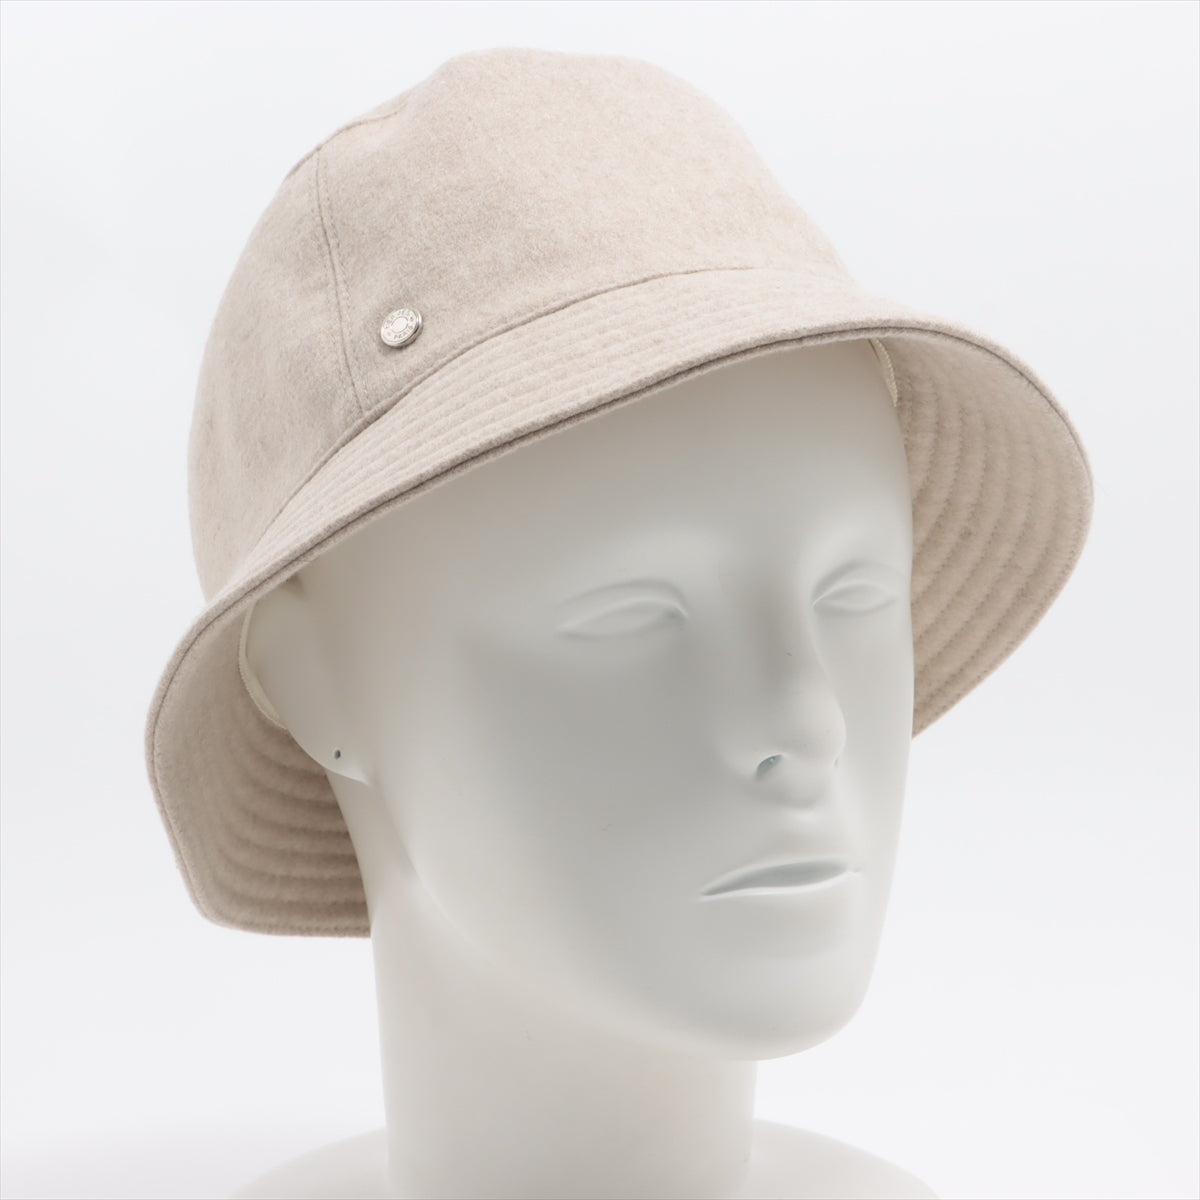 Hermès Serie Hat 56 Cashmere Beige Wears Stains Stained